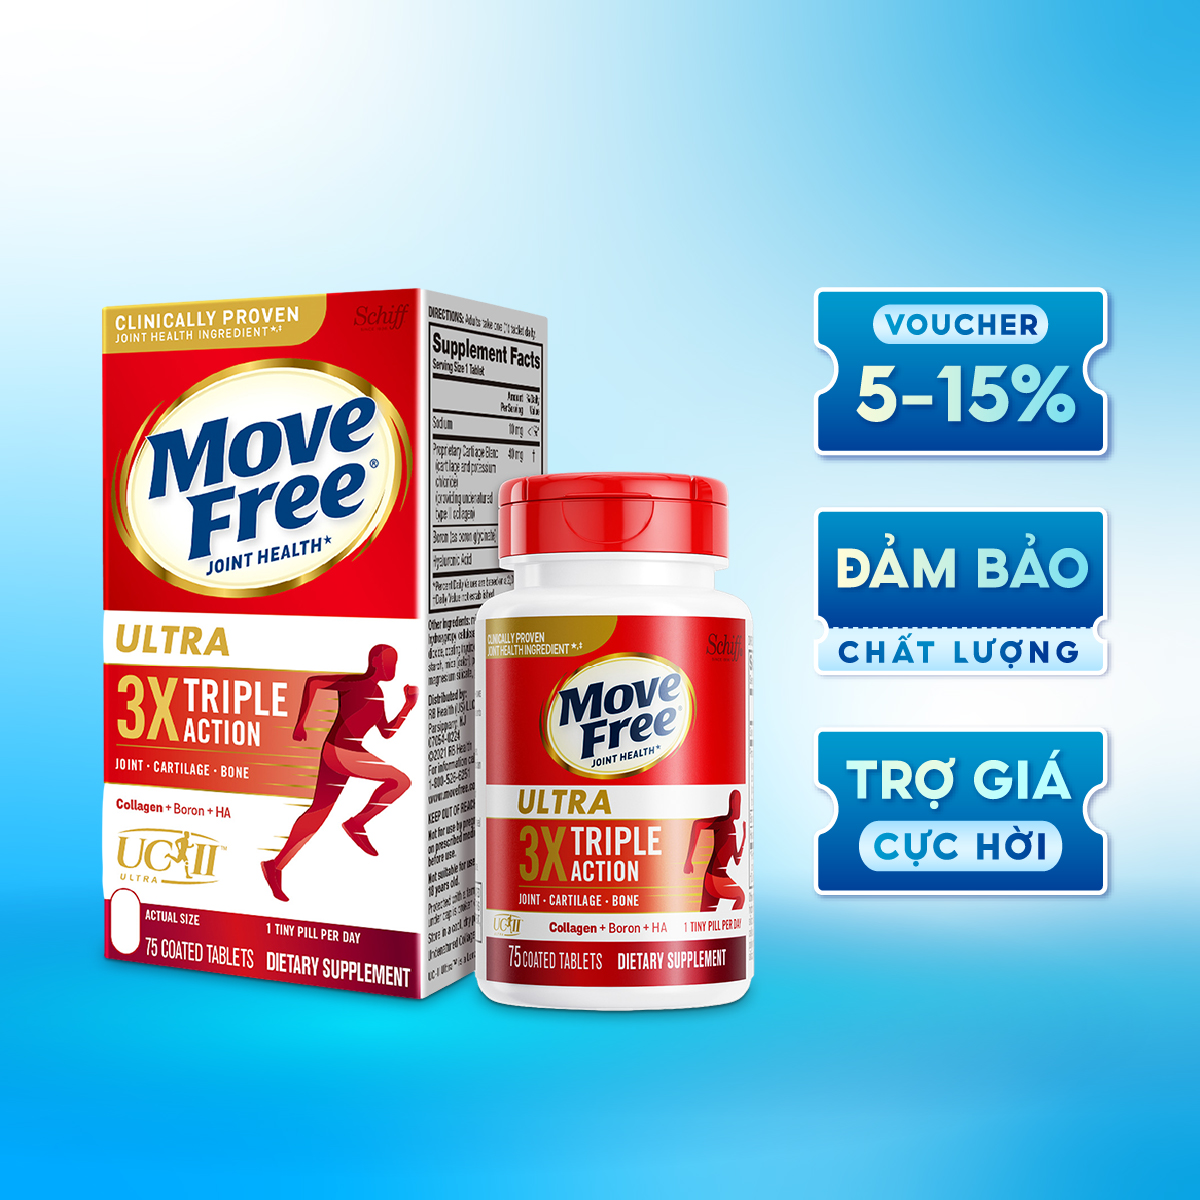 Move Free Ultra 3X Triple Action 75 tablets